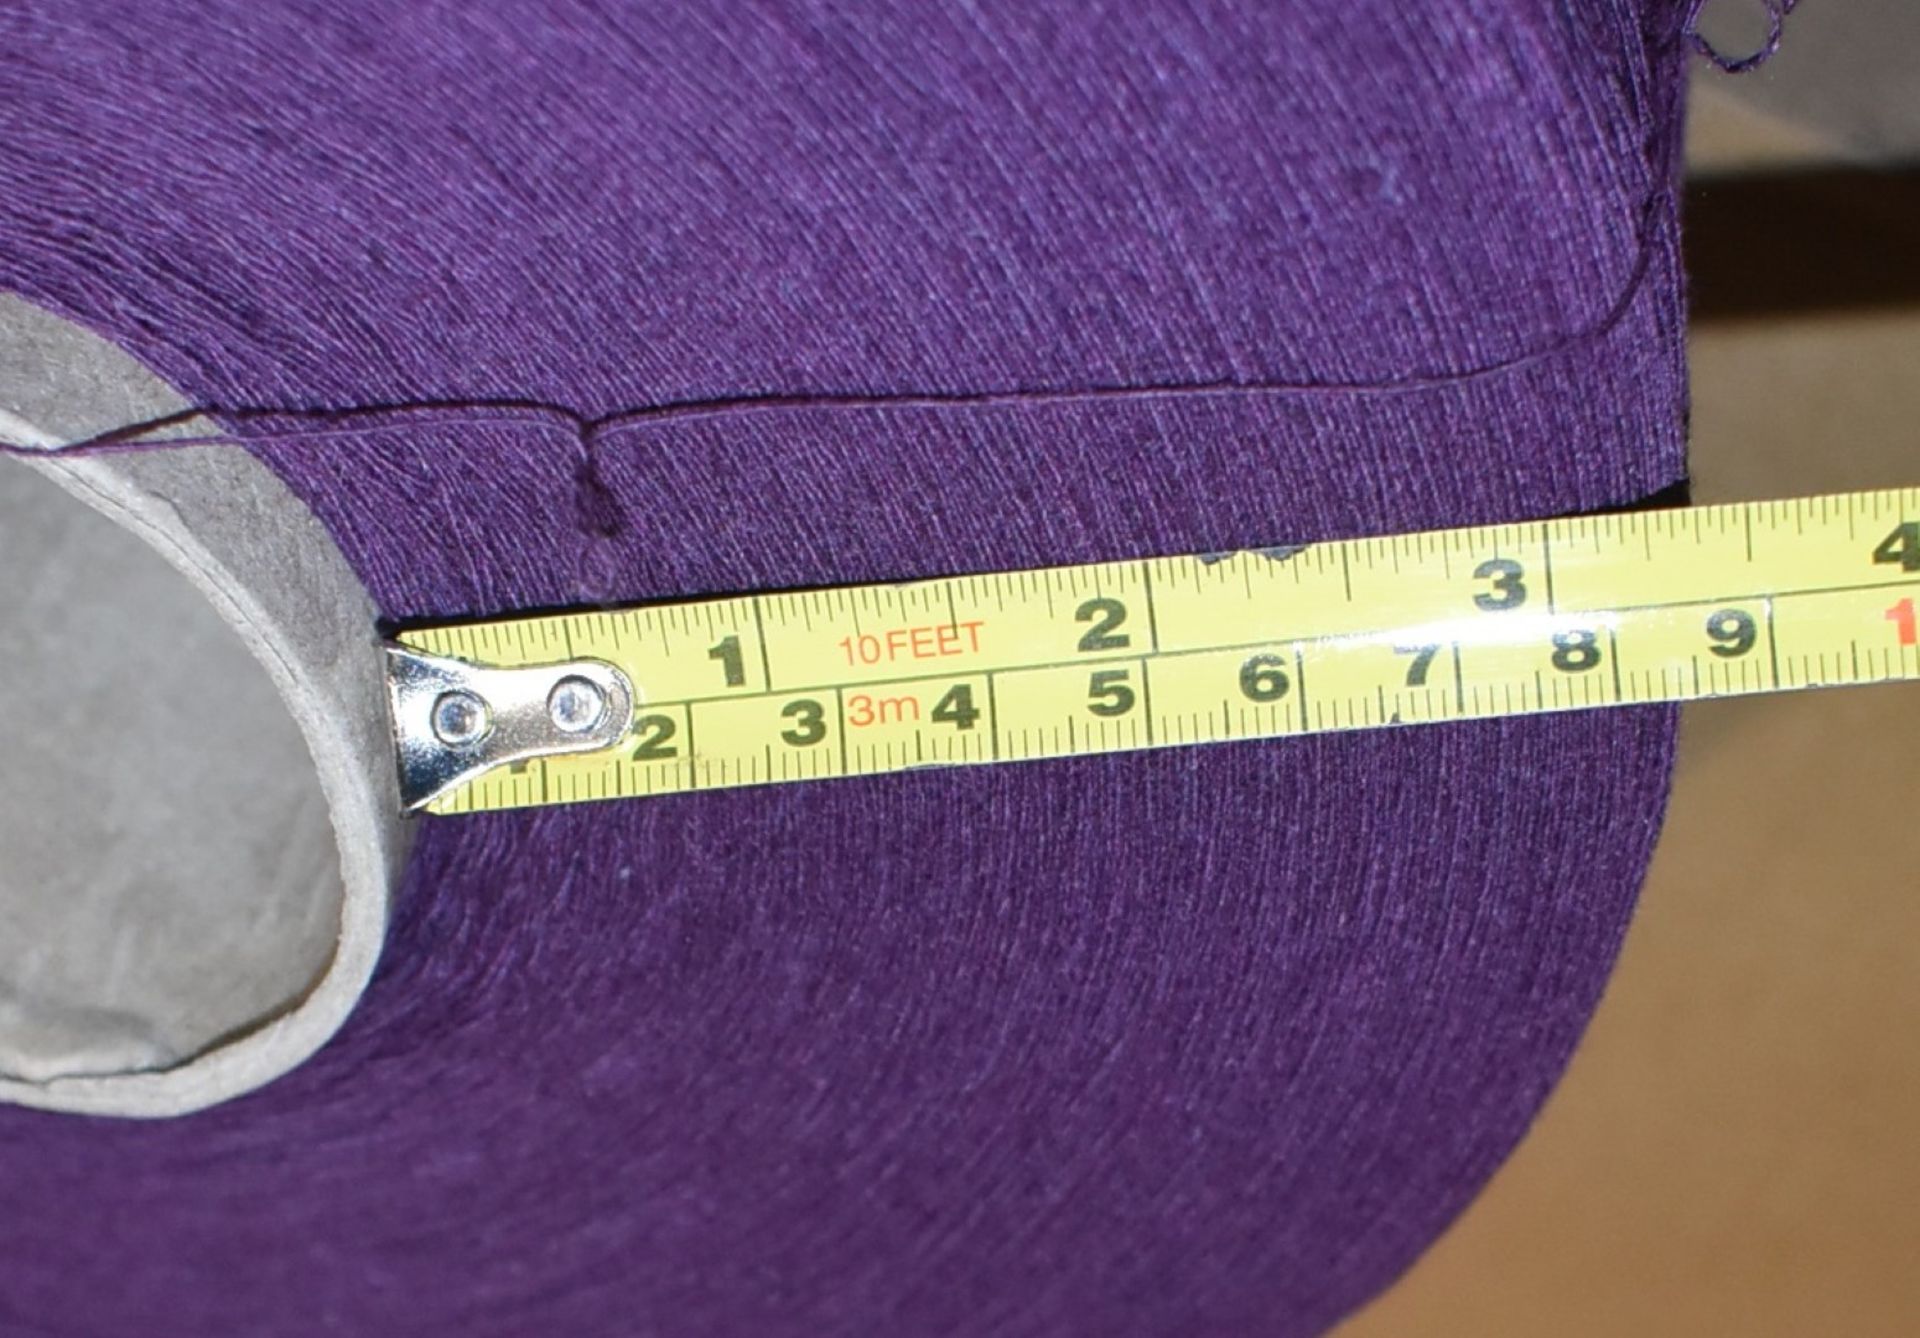 12 x Cones of 1/13 MicroCotton Knitting Yarn - Purple - Approx Weight: 2,300g - New Stock ABL Yarn - Image 15 of 15